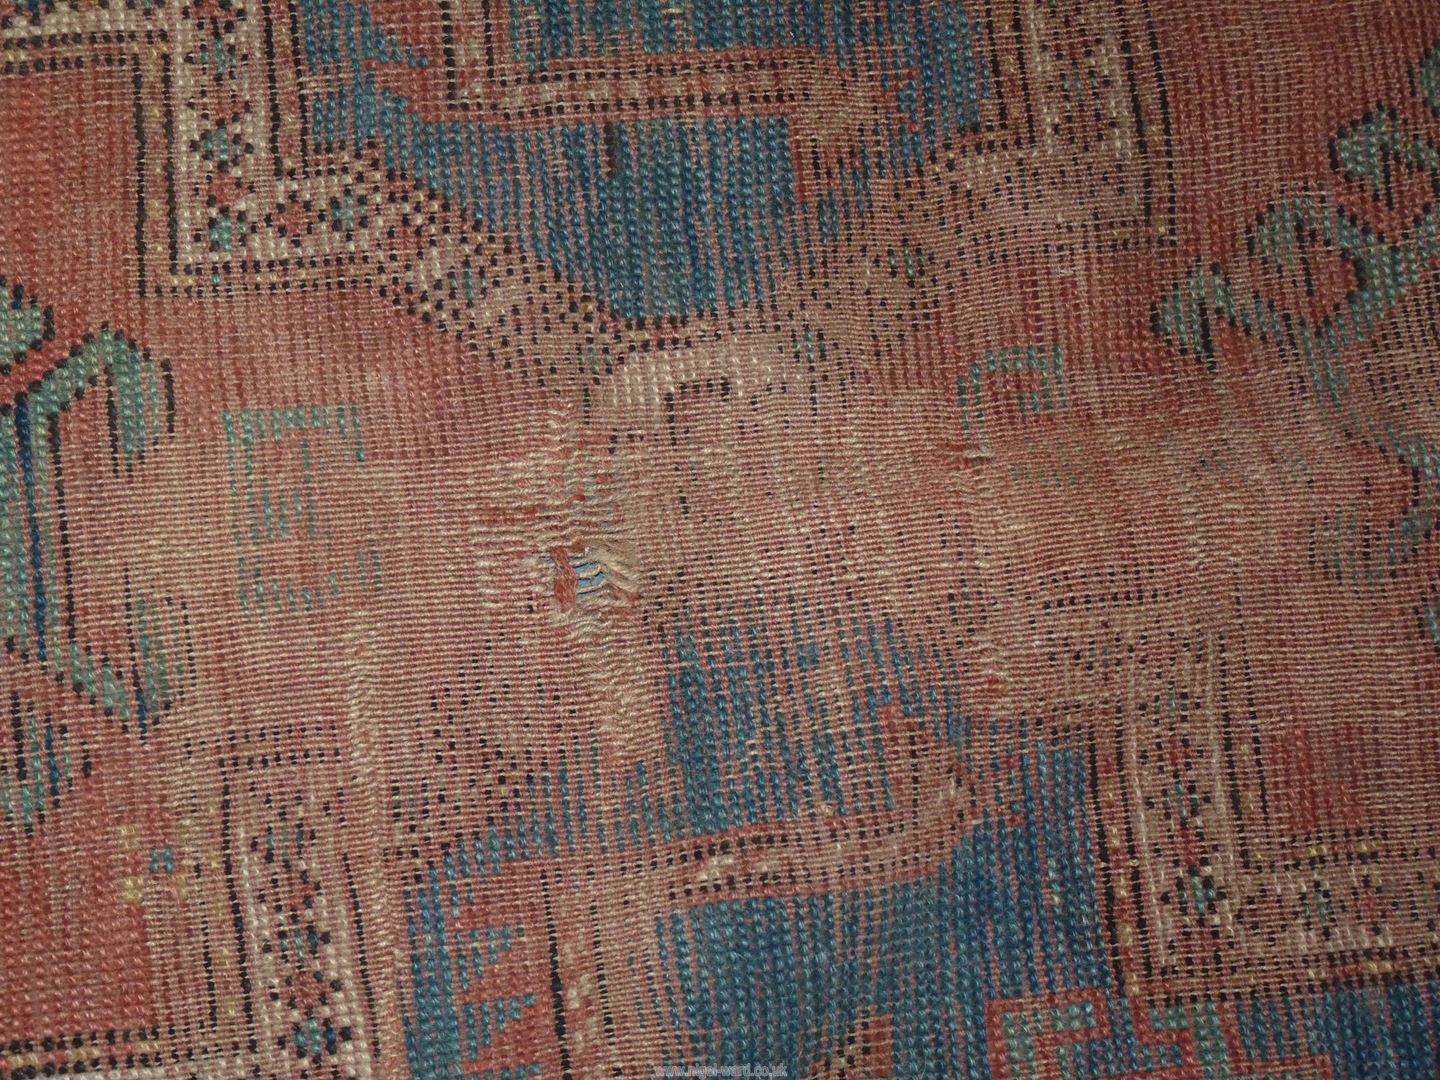 A border pattern rug in blue ground with red and cream geometric patterns, worn condition, - Image 3 of 4